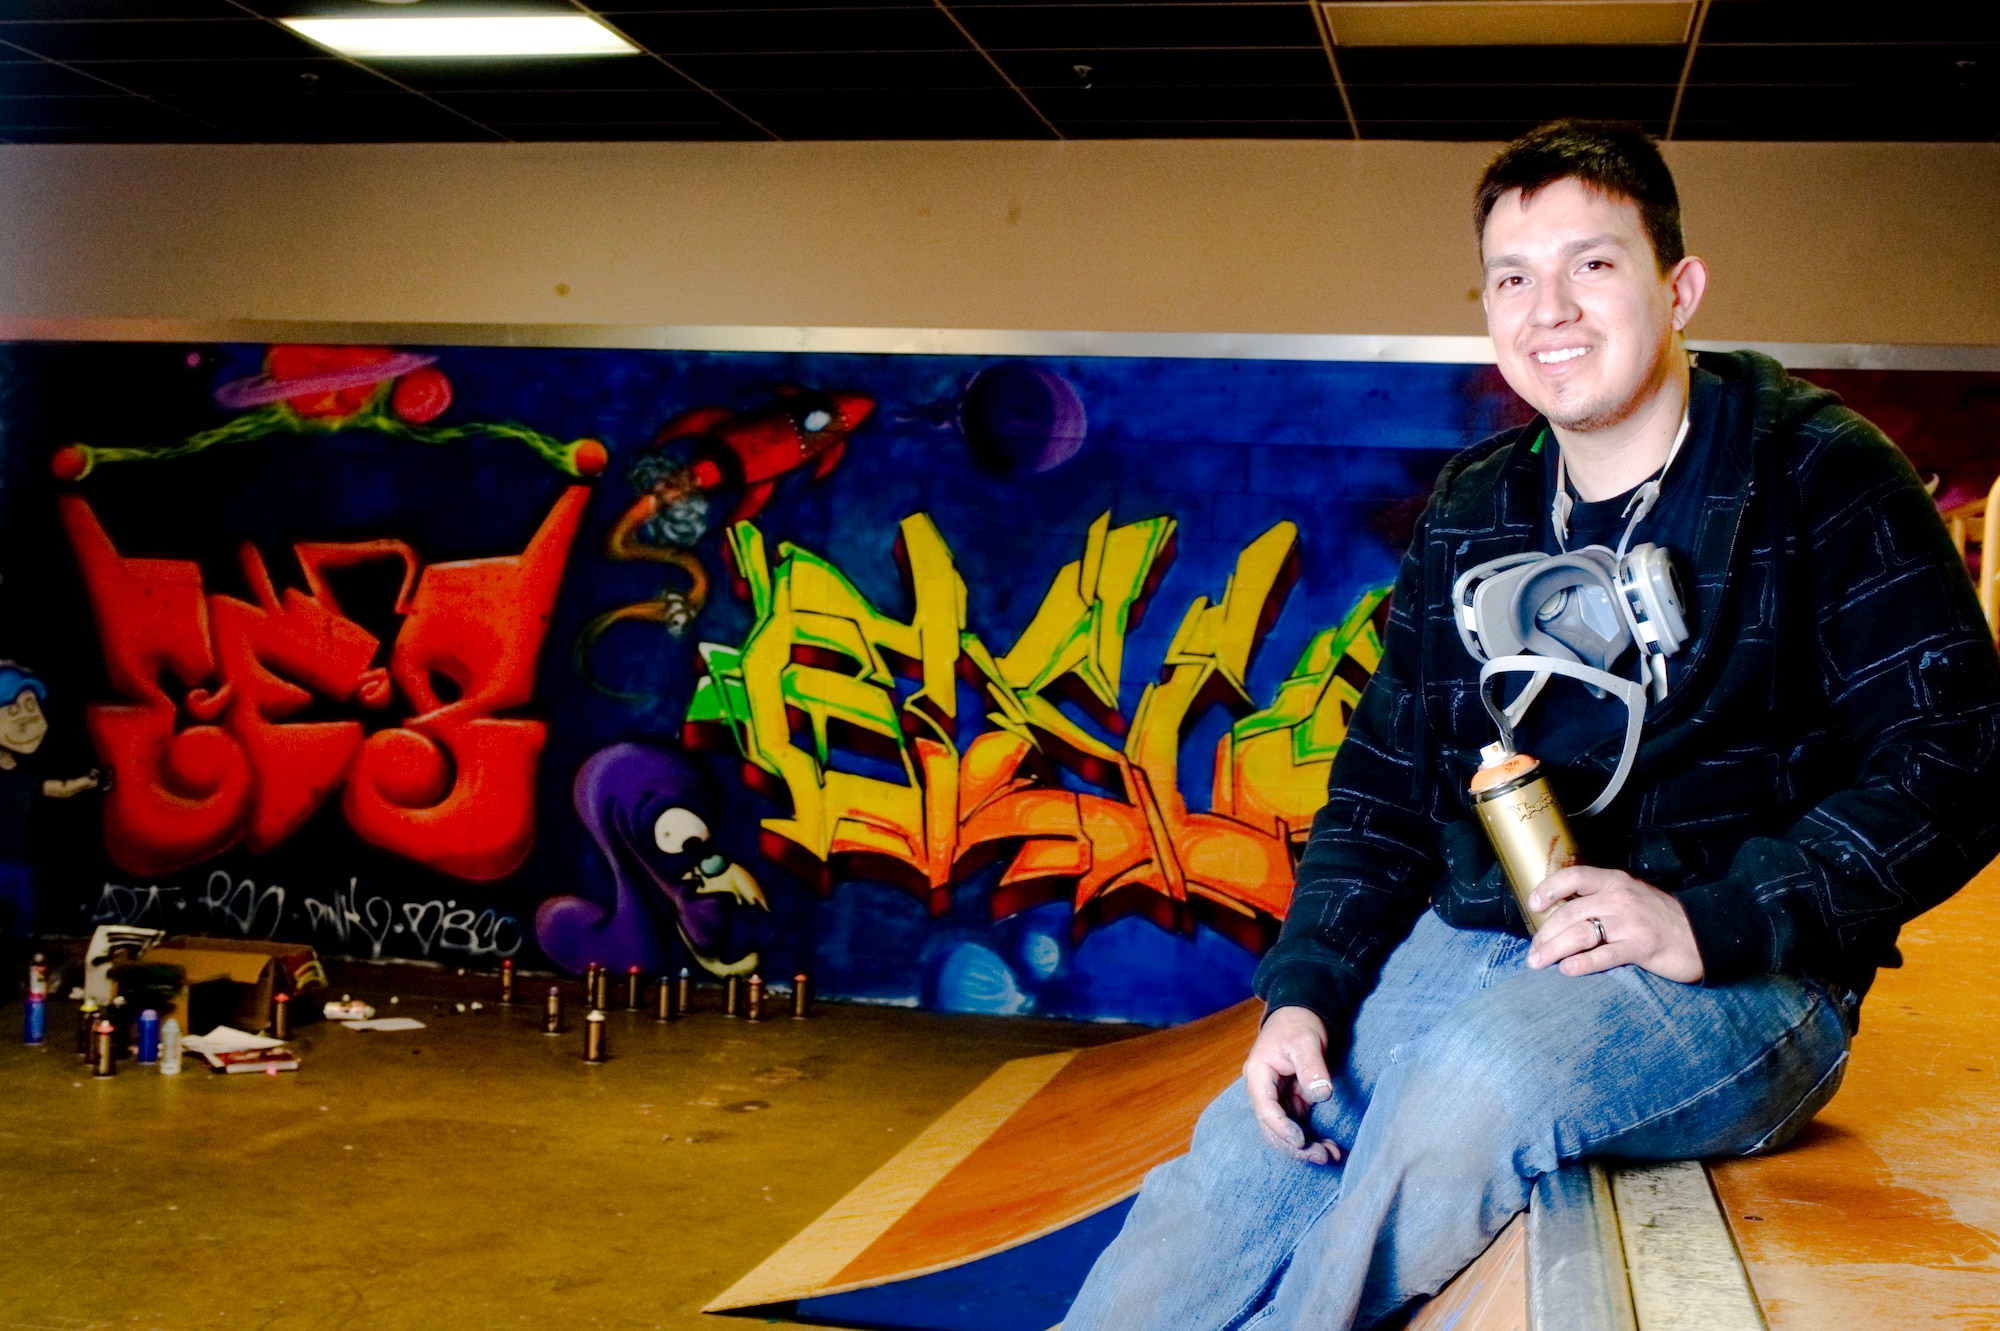 ELMENDORF AIR FORCE BASE, Alaska -- Staff Sgt. Art Delafuente takes a break in front of his graffiti moral at the indoor skate park in the Arctic Oasis Community Center April 3, 2009. Delafuente is a crew chief from 19th Aircraft Maintenance Unit and has spent countless hours volunteering to paint the skate park with graffiti. (U.S. Air Force photo by Senior Airman Jonathan Steffen) 